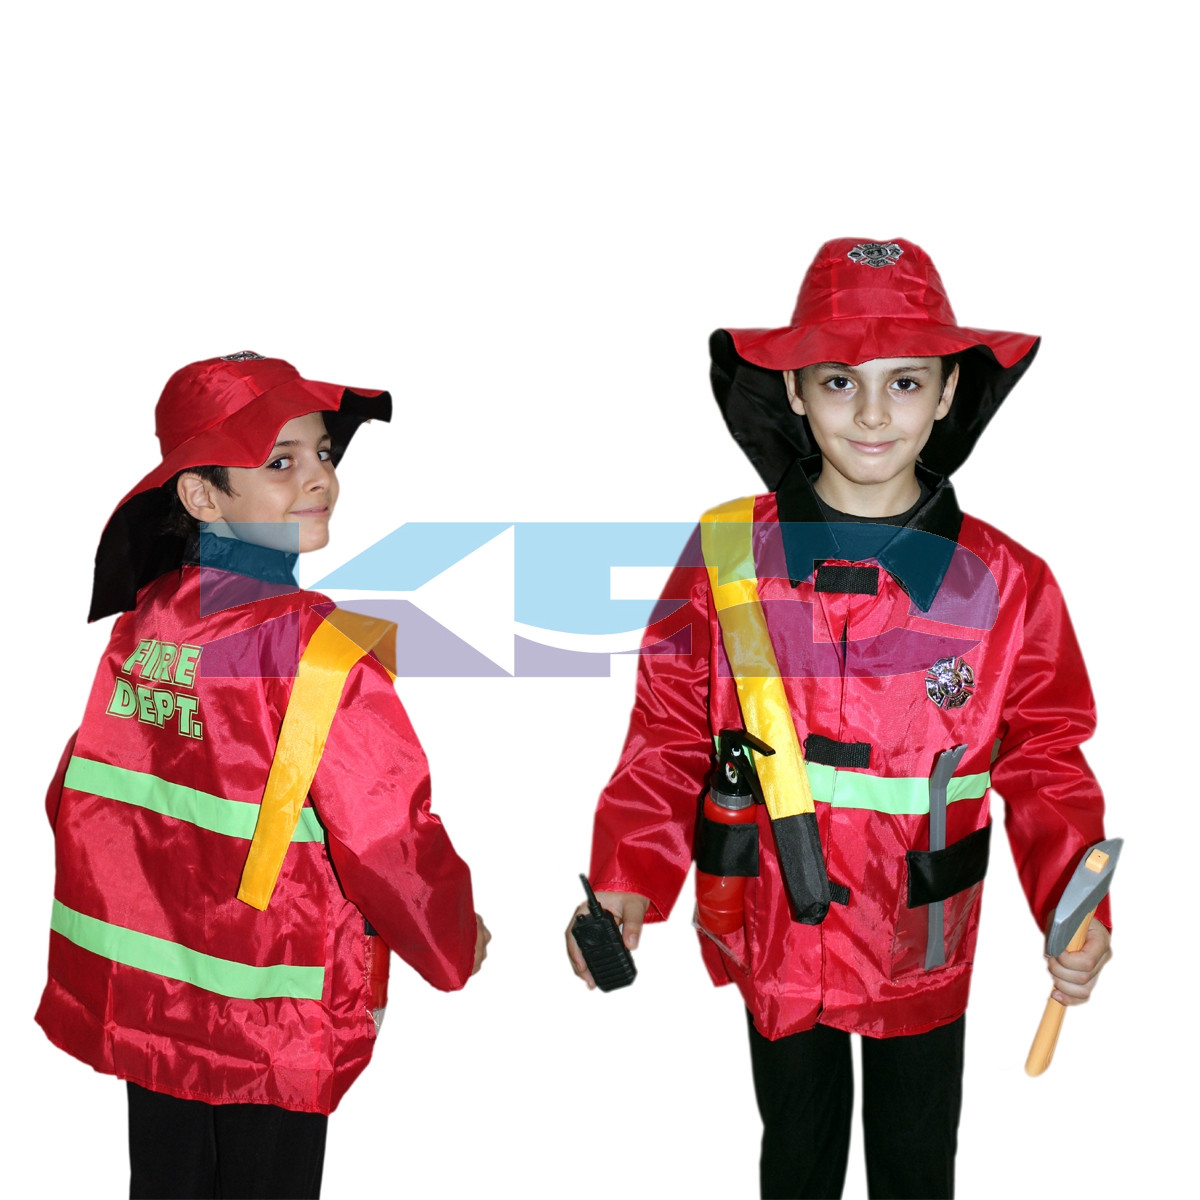  FireFighter/Fireman Costume Our Helper Costume For School Annual function/Theme Party/Competition/Stage Shows Dress